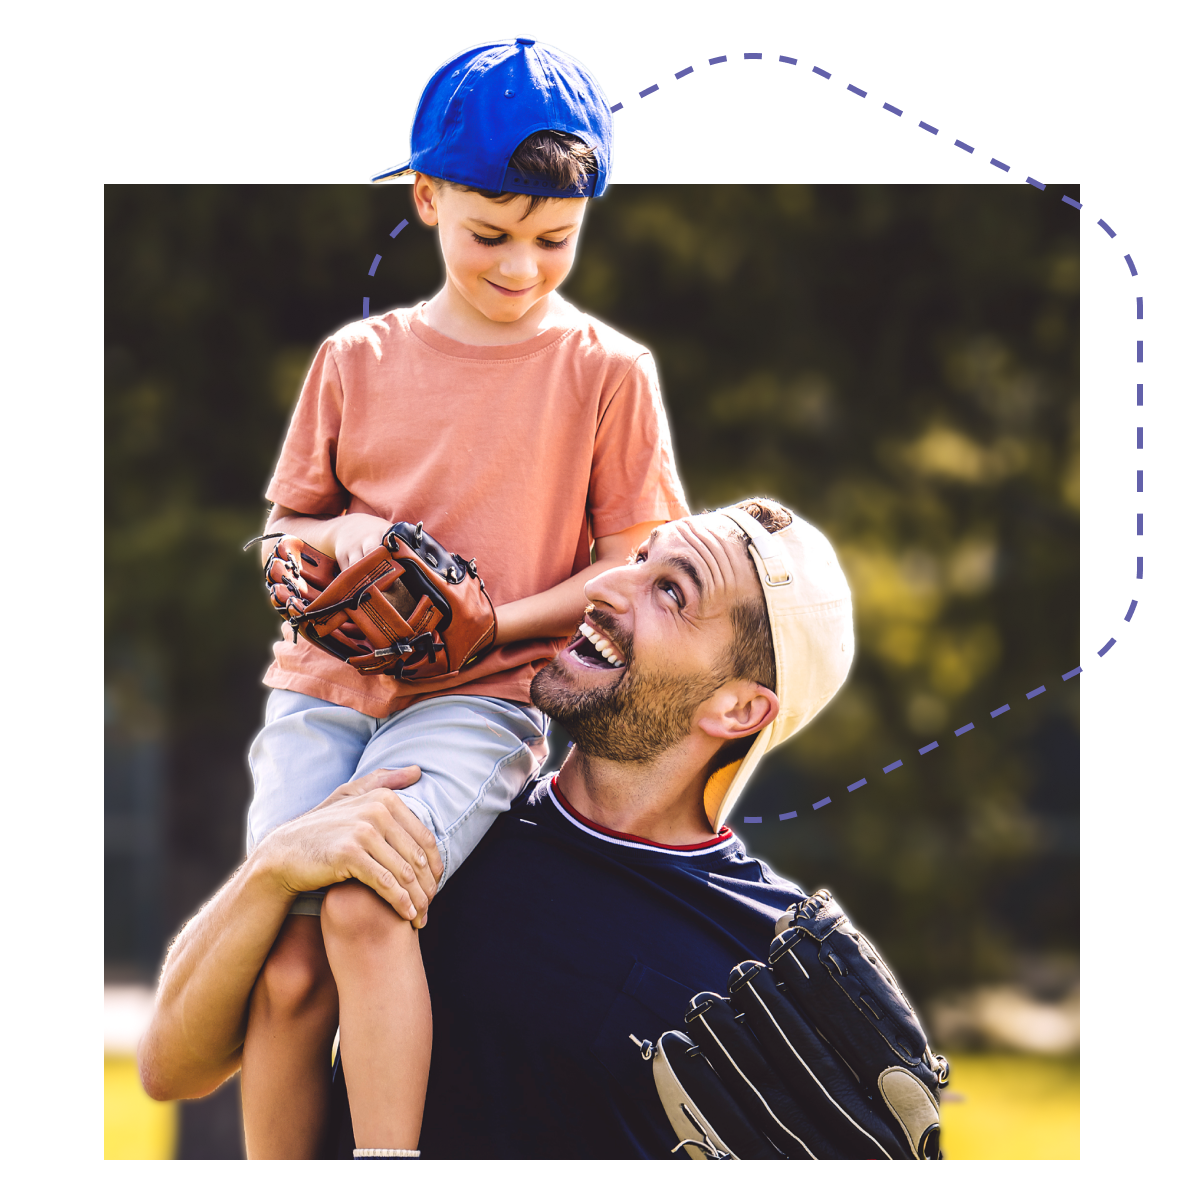 A parent holding up their baseball playing kid on their shoulder, excited to be on their way to play catch.